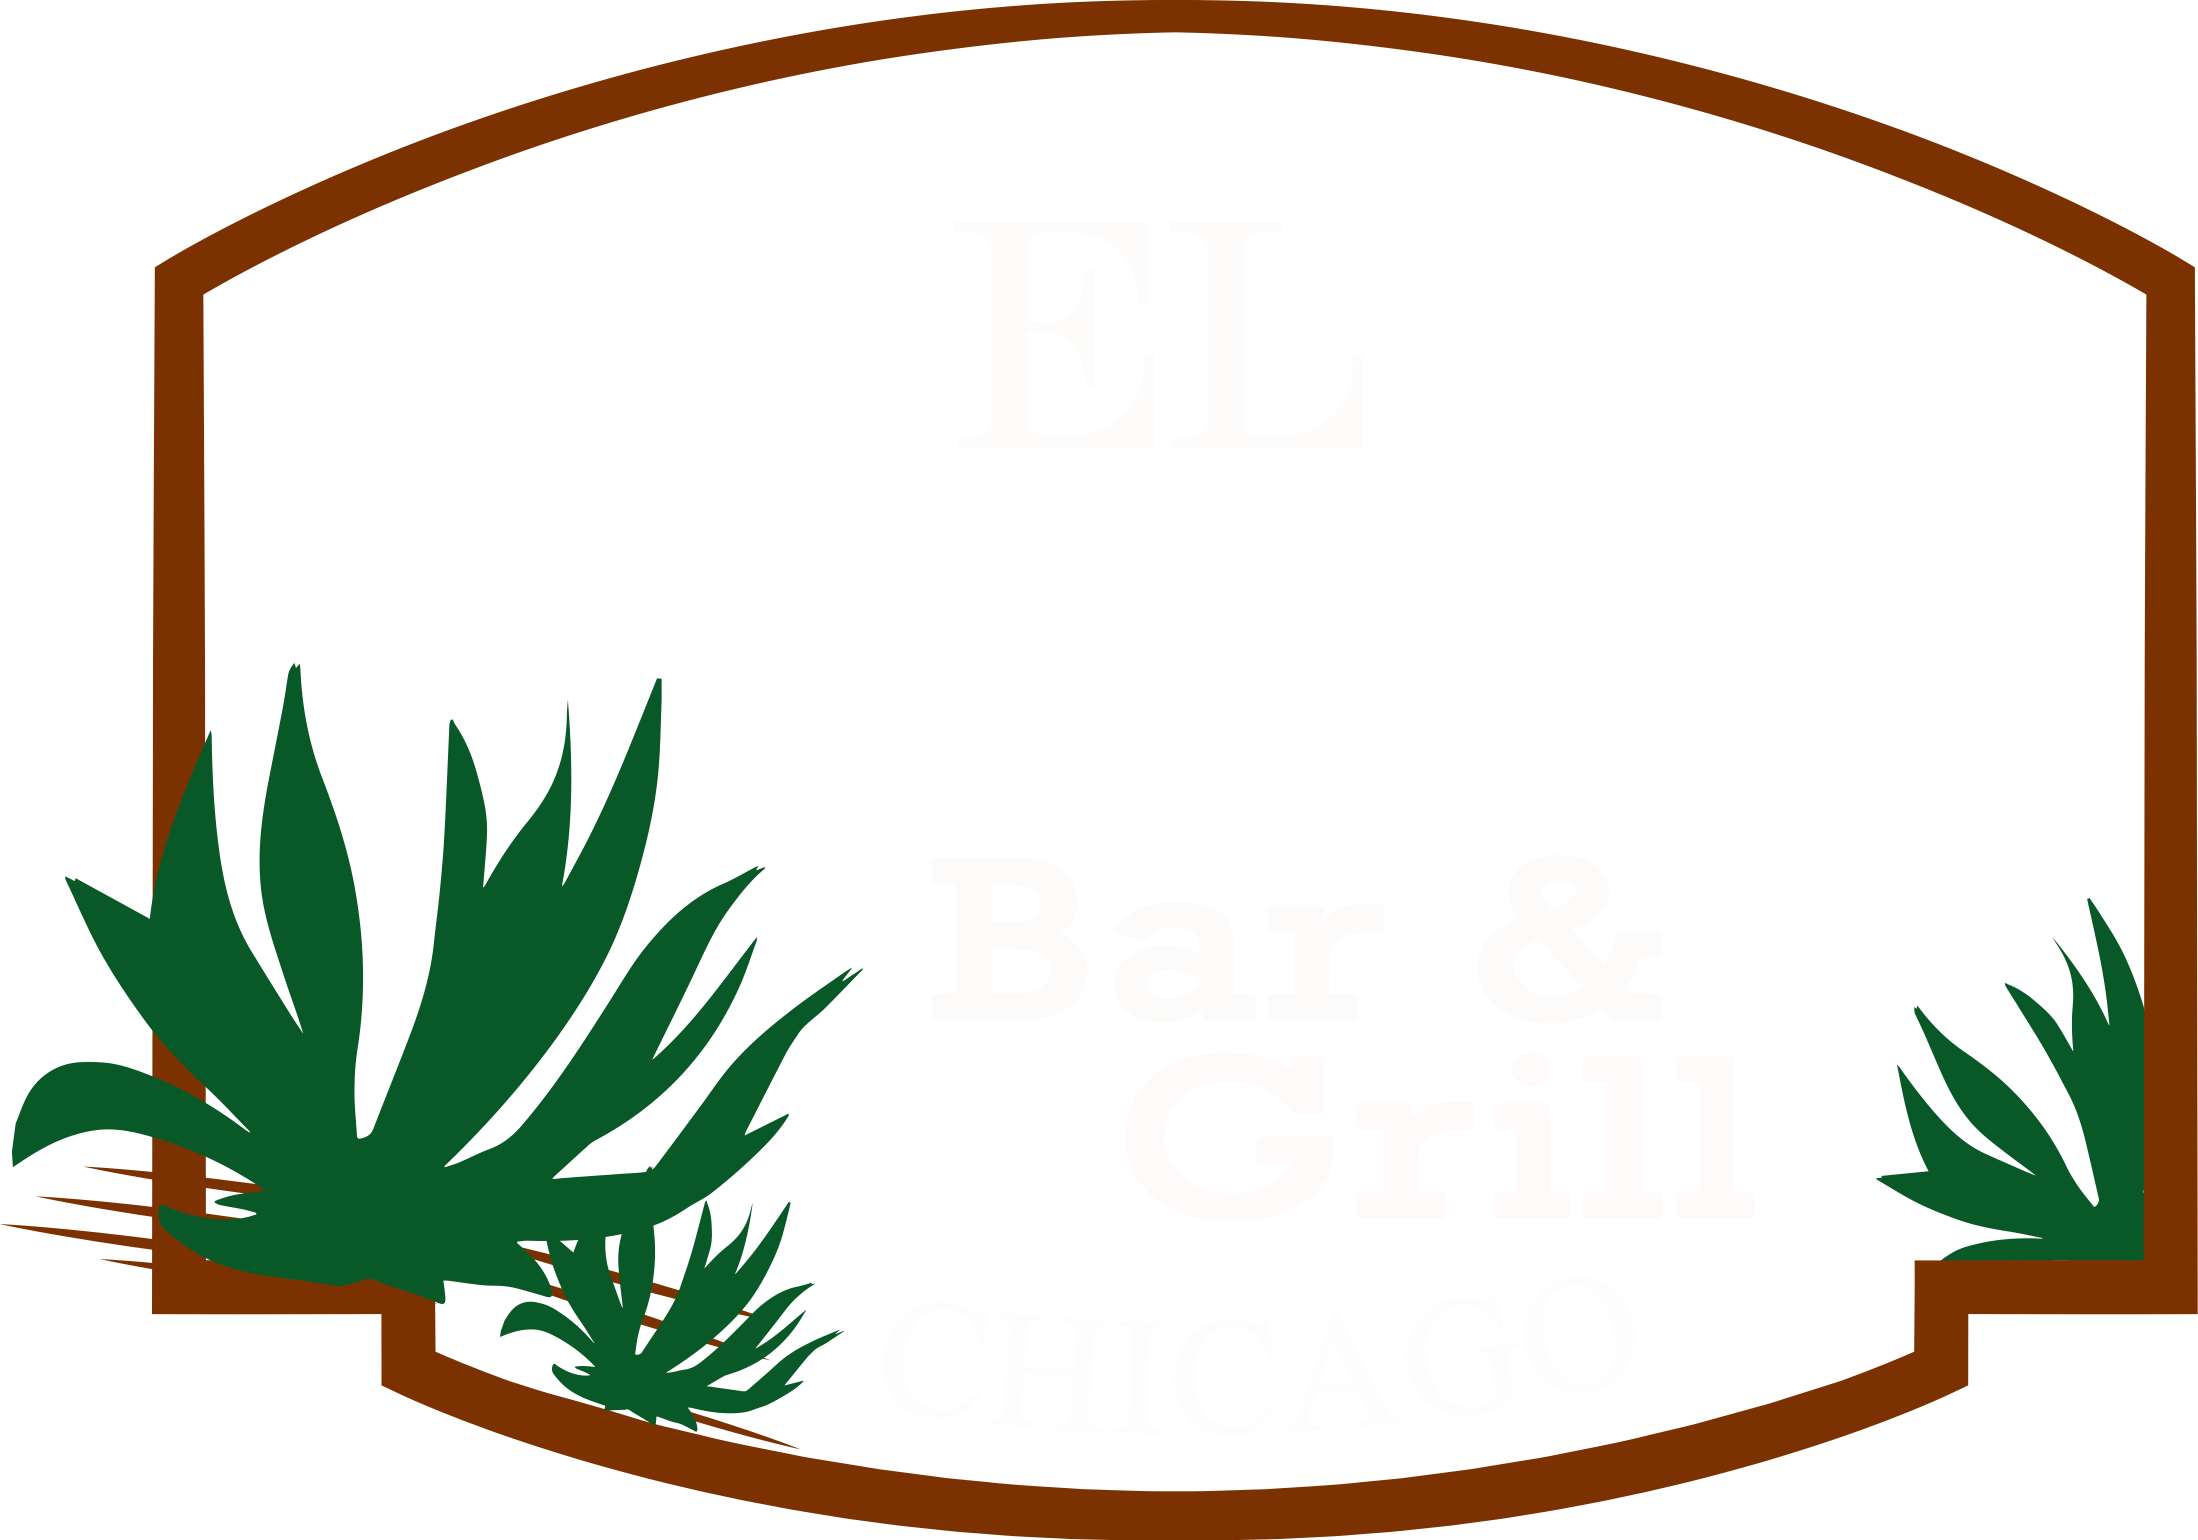 New Years Eve Fiesta - El Tequilas Bar & Grill (2198x1540)